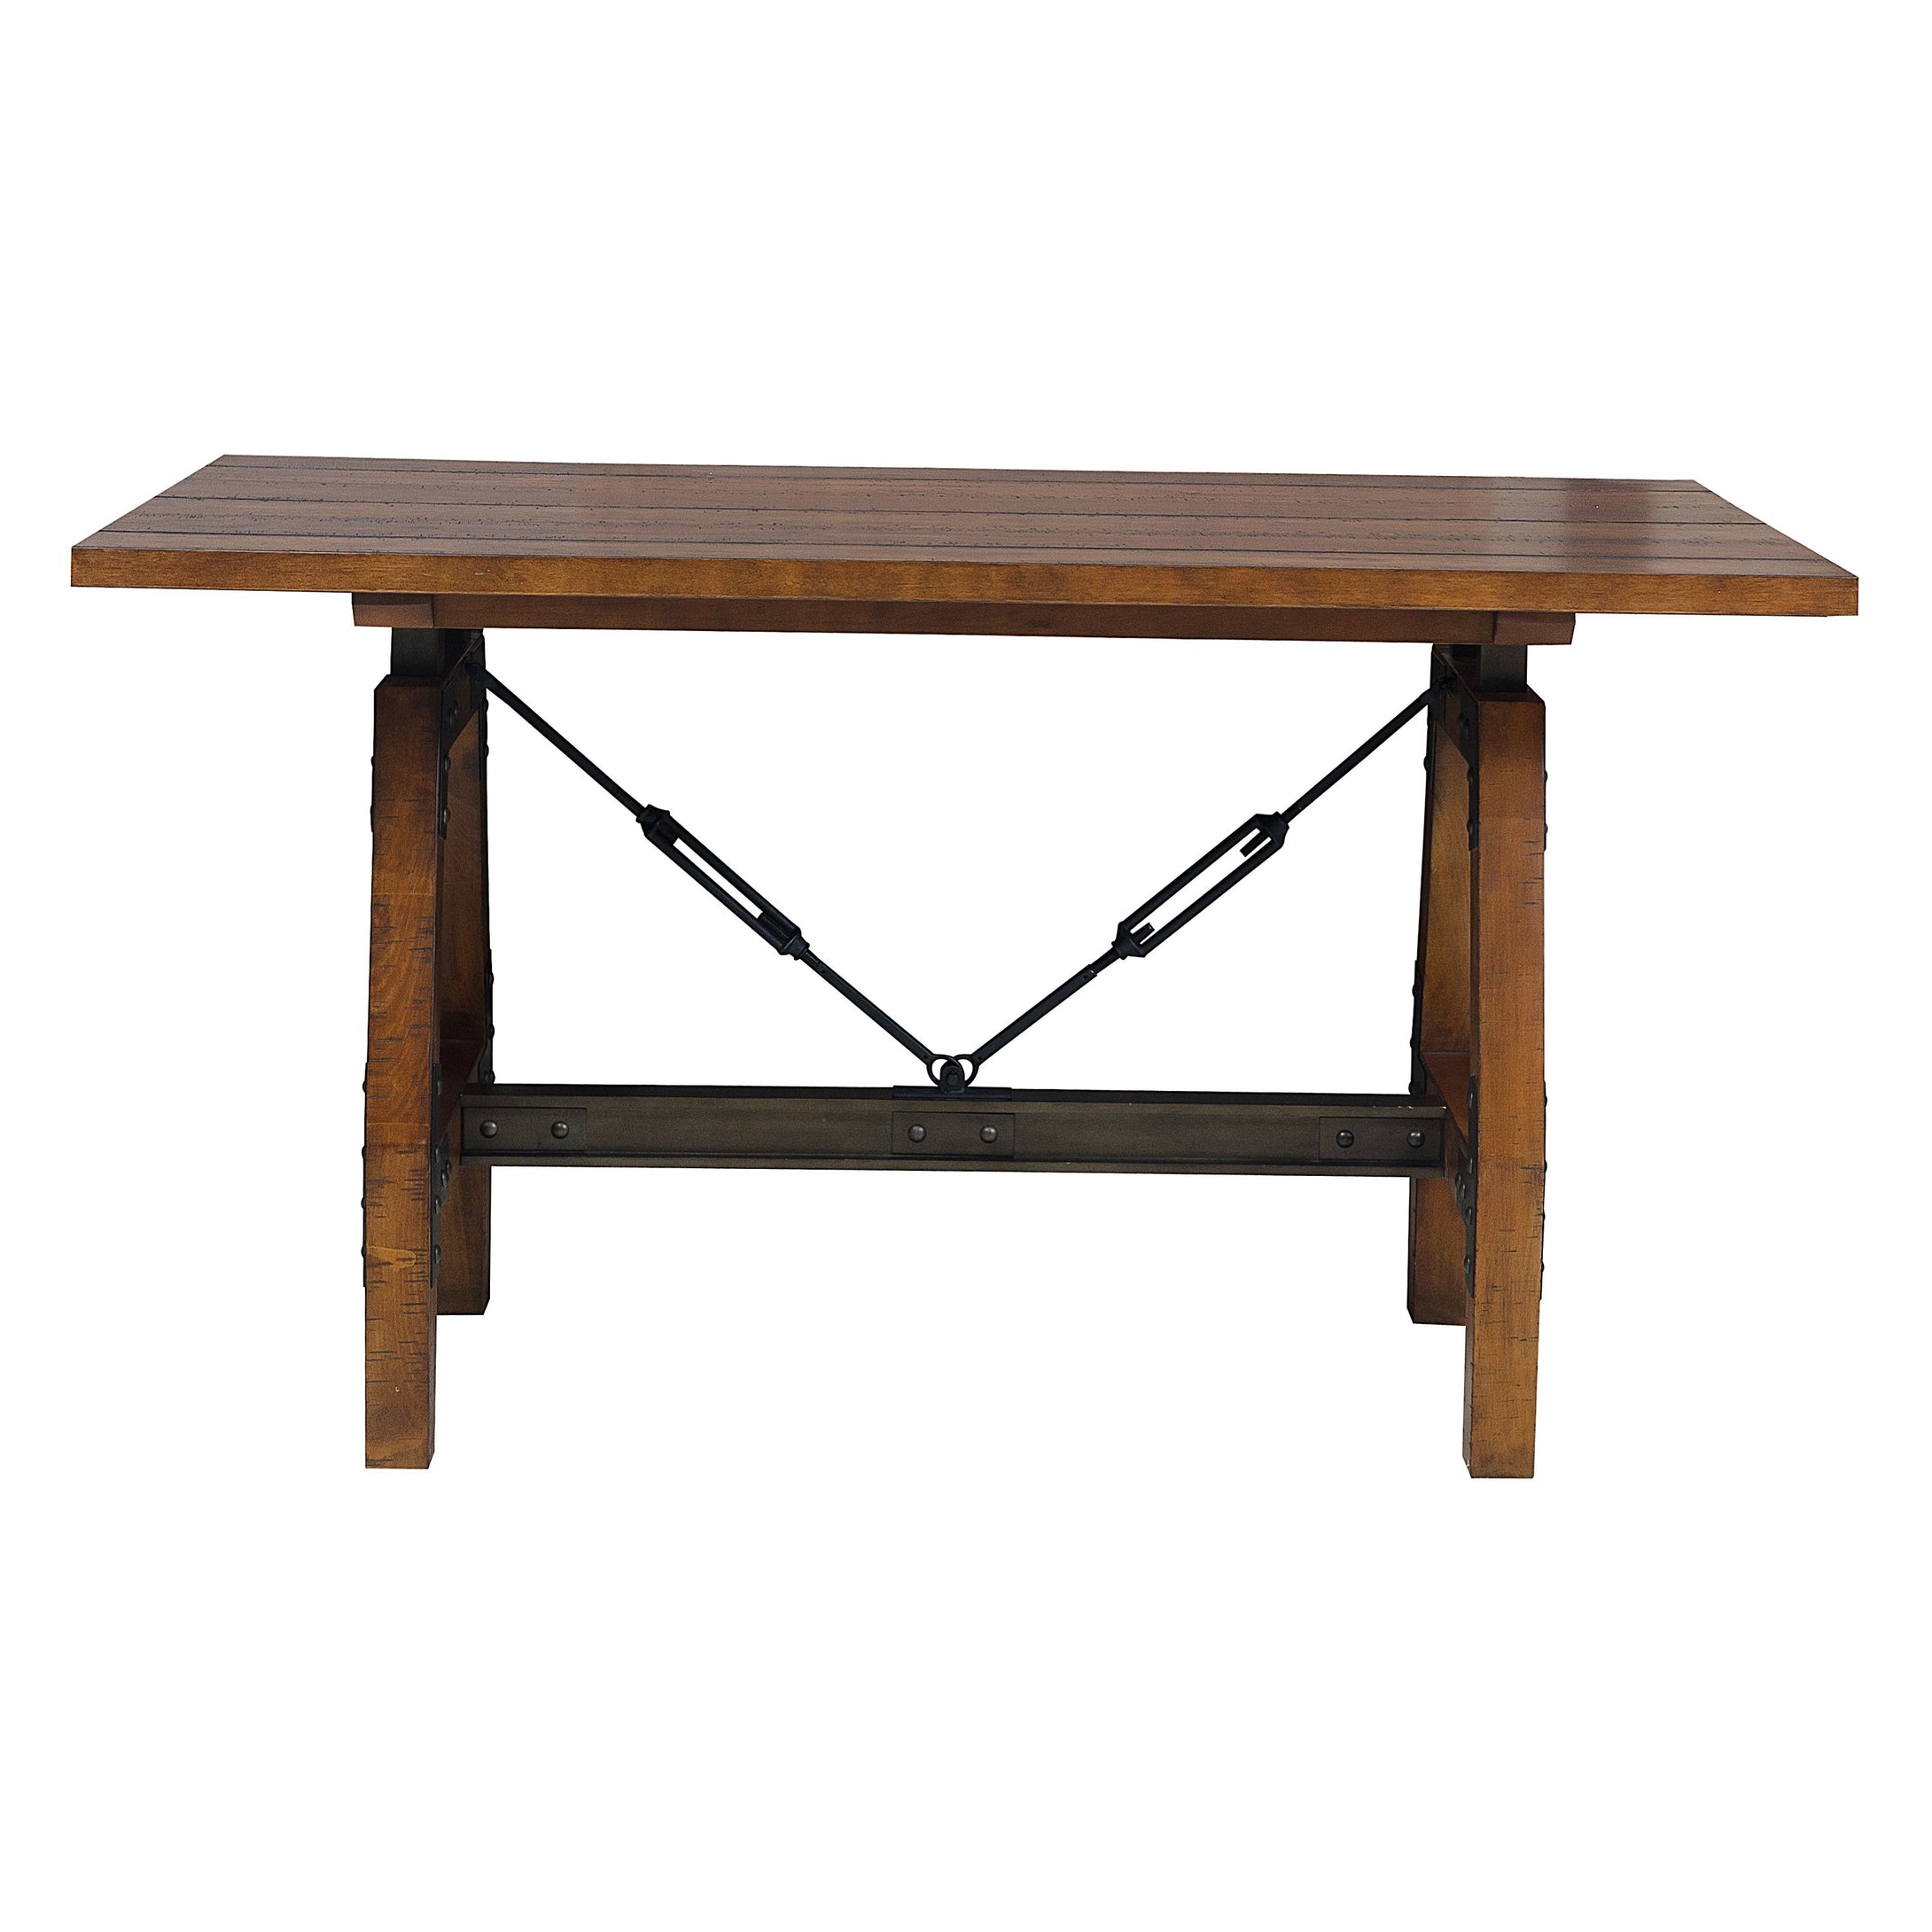 1715-36 Counter Height Table